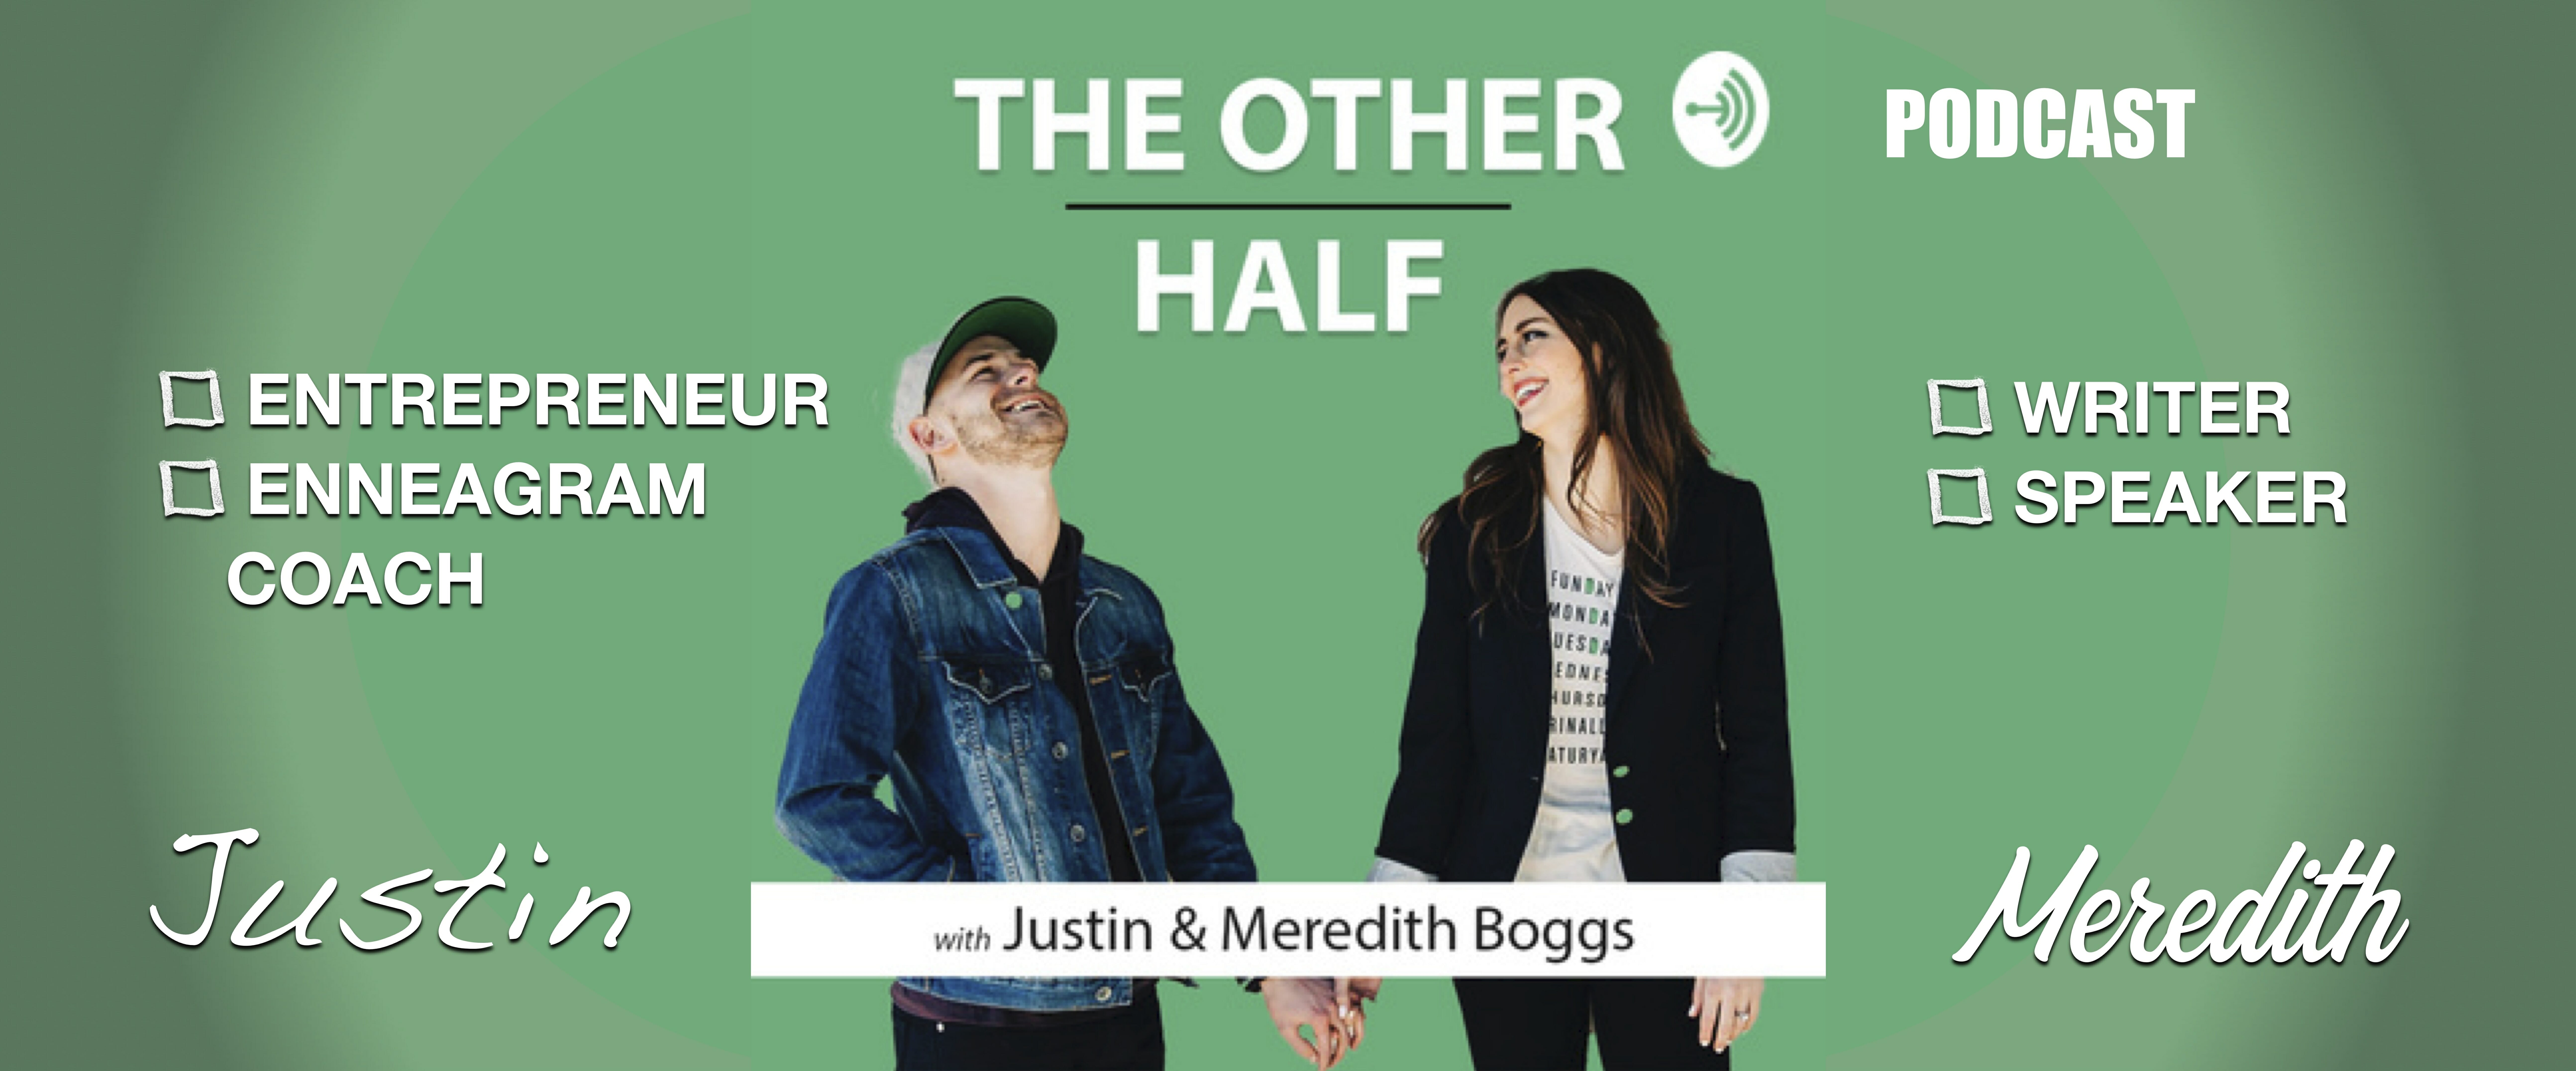 THE OTHER HALF PODCAST: Shadow, Side, and True Self